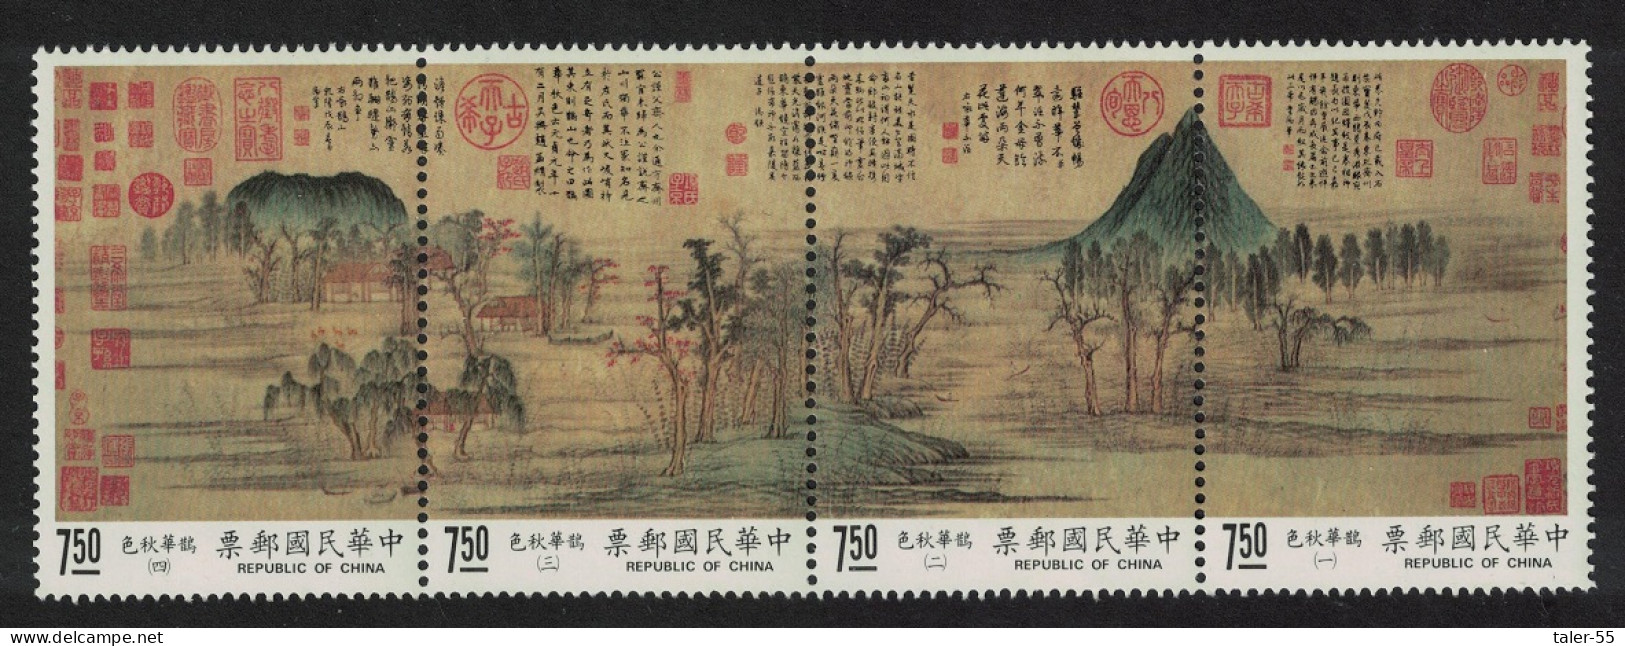 Taiwan Painting 'Autumn Colours On The Ch'iao' 4v Strip 1989 MNH SG#1881-1884 - Nuovi